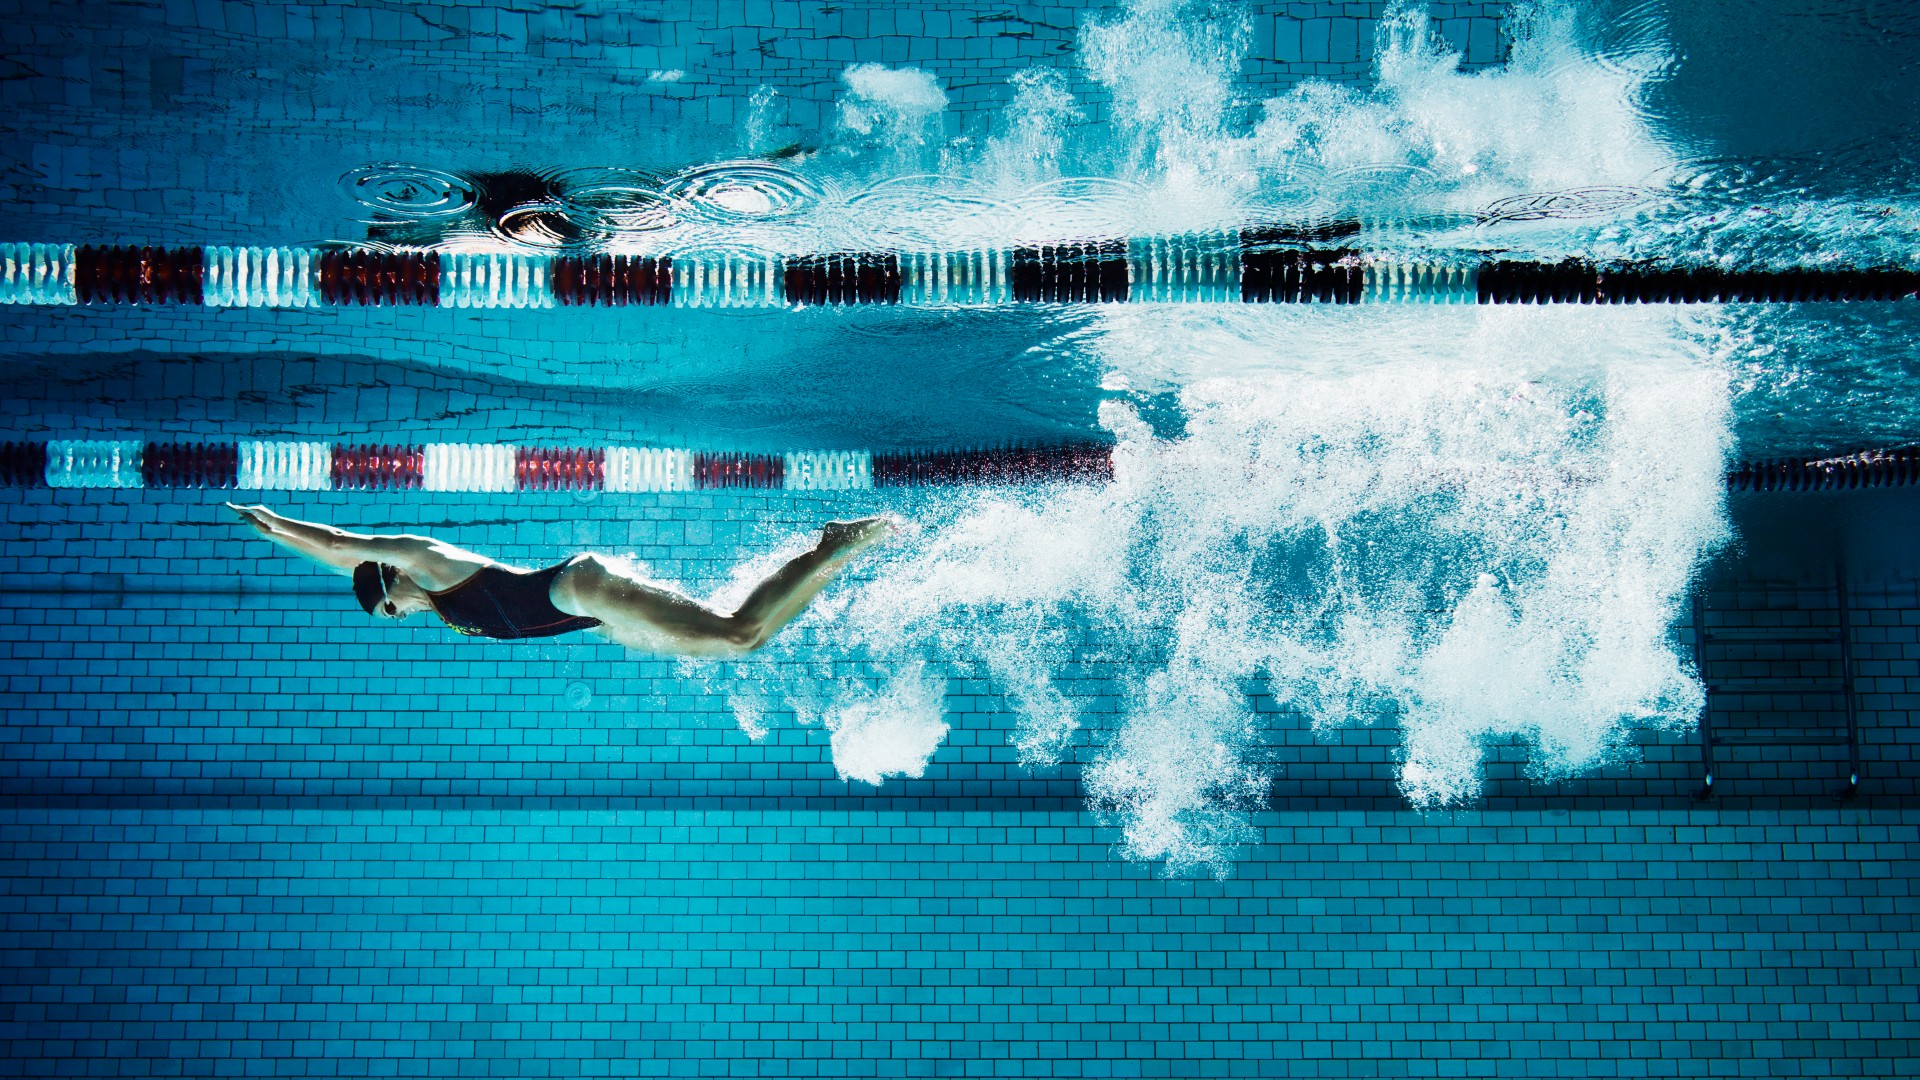 A woman under water in a swimming pool